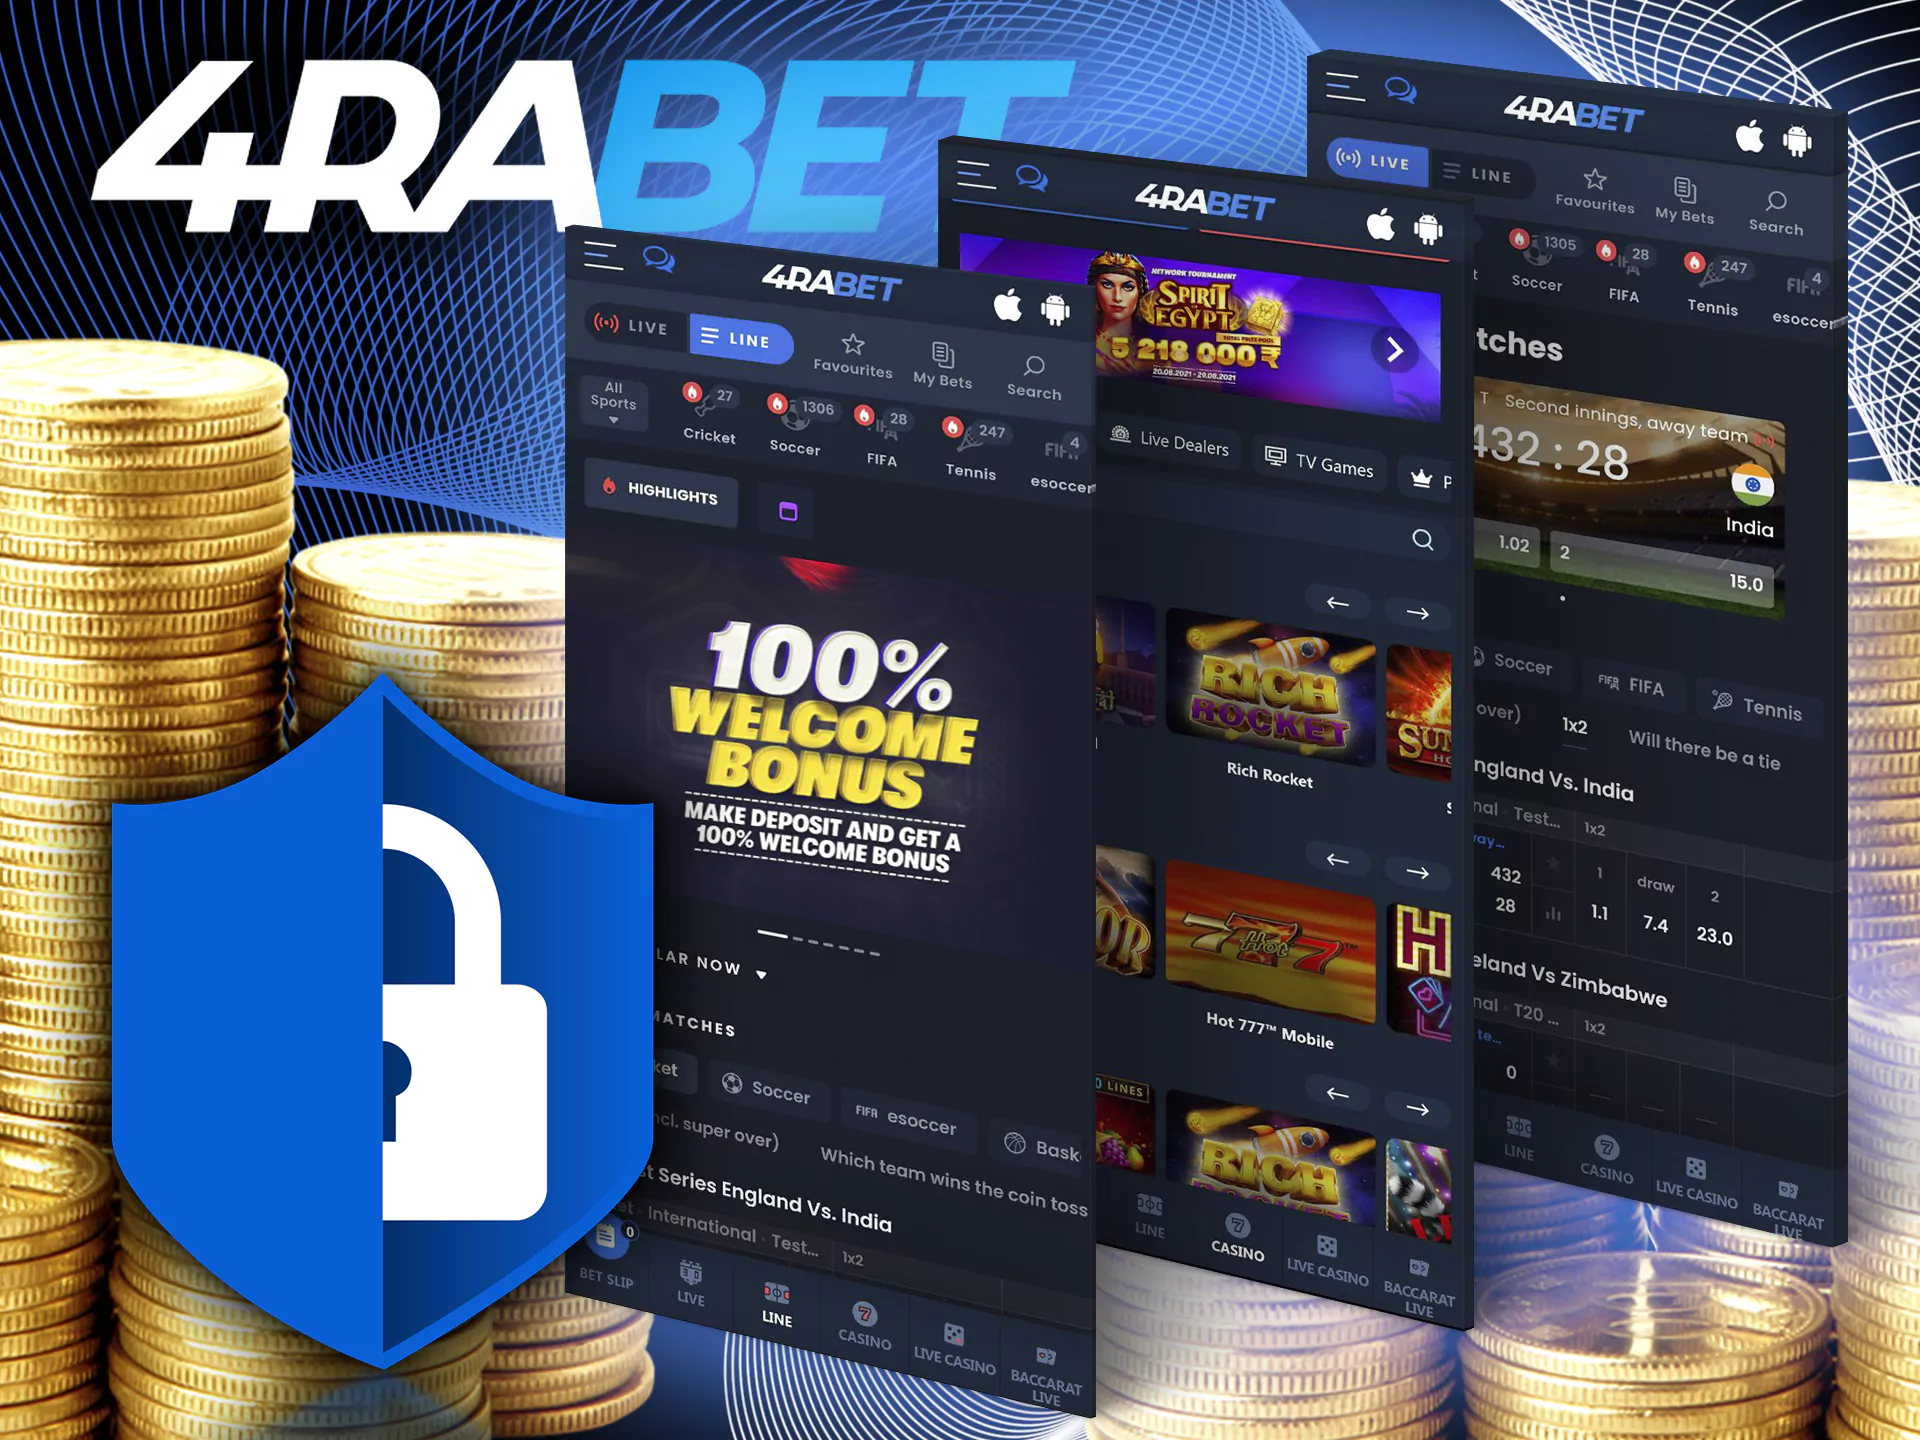 Security 4rabet bonus for user anonymity, safety and security when using bets at the bookmaker.